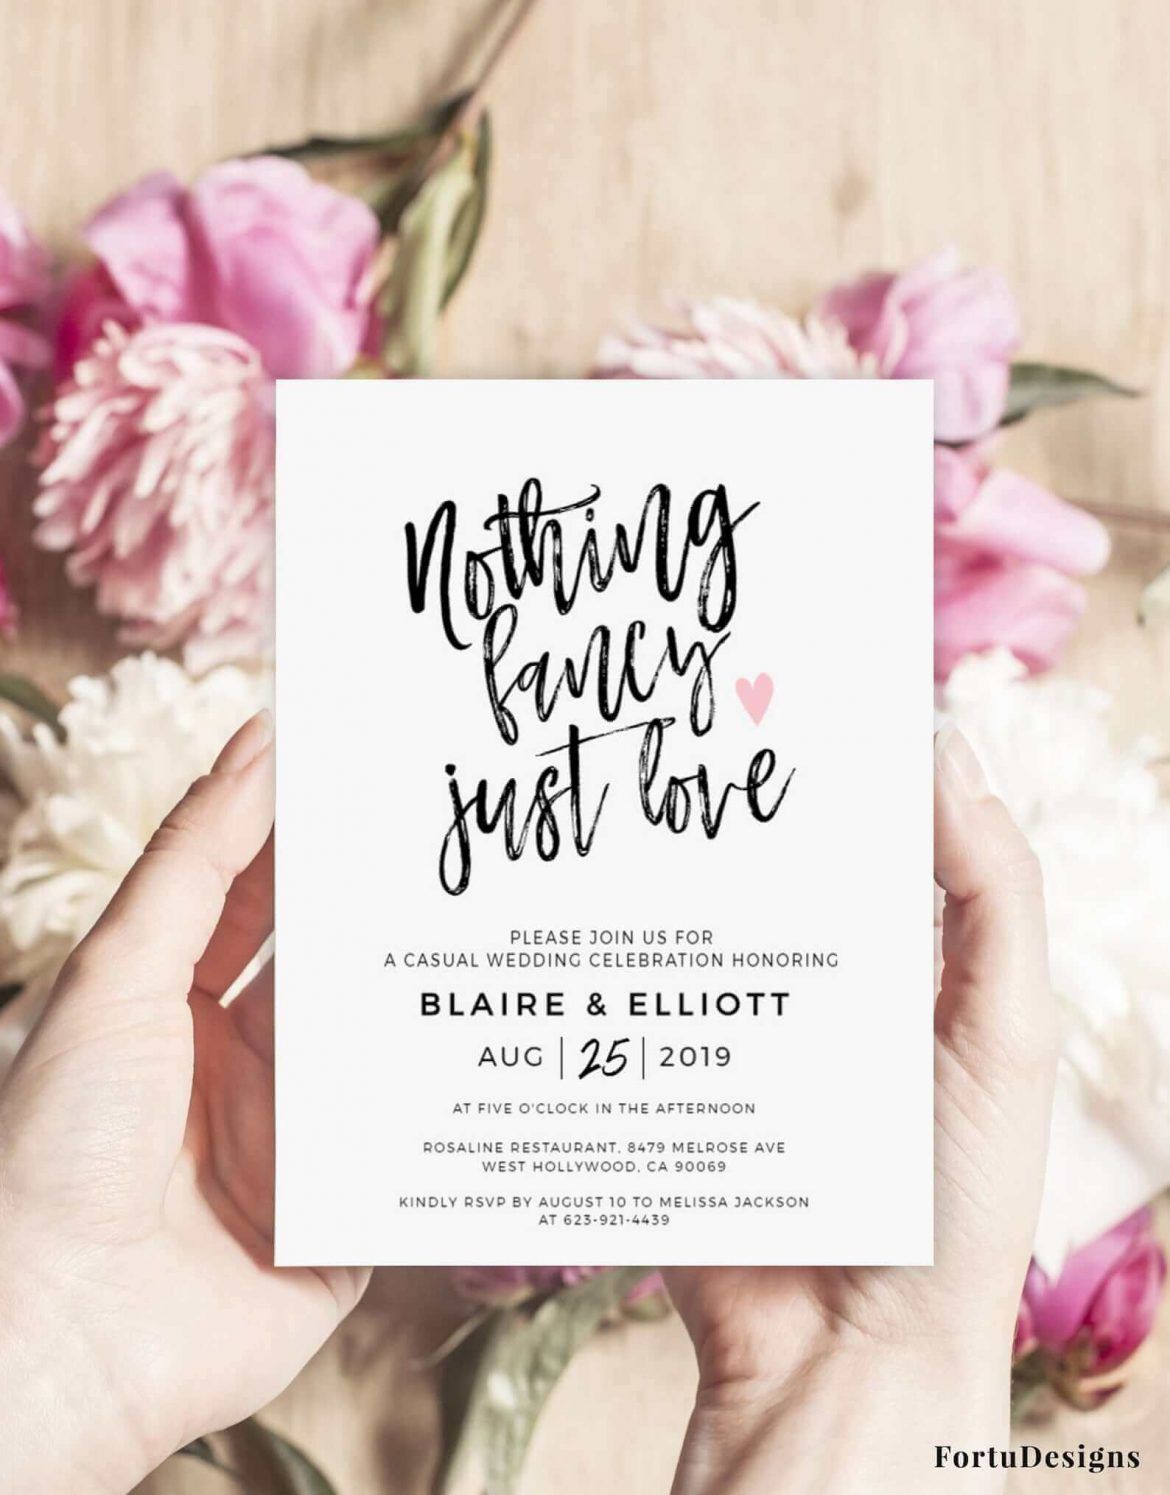 How Soon To Send Out Wedding Invites